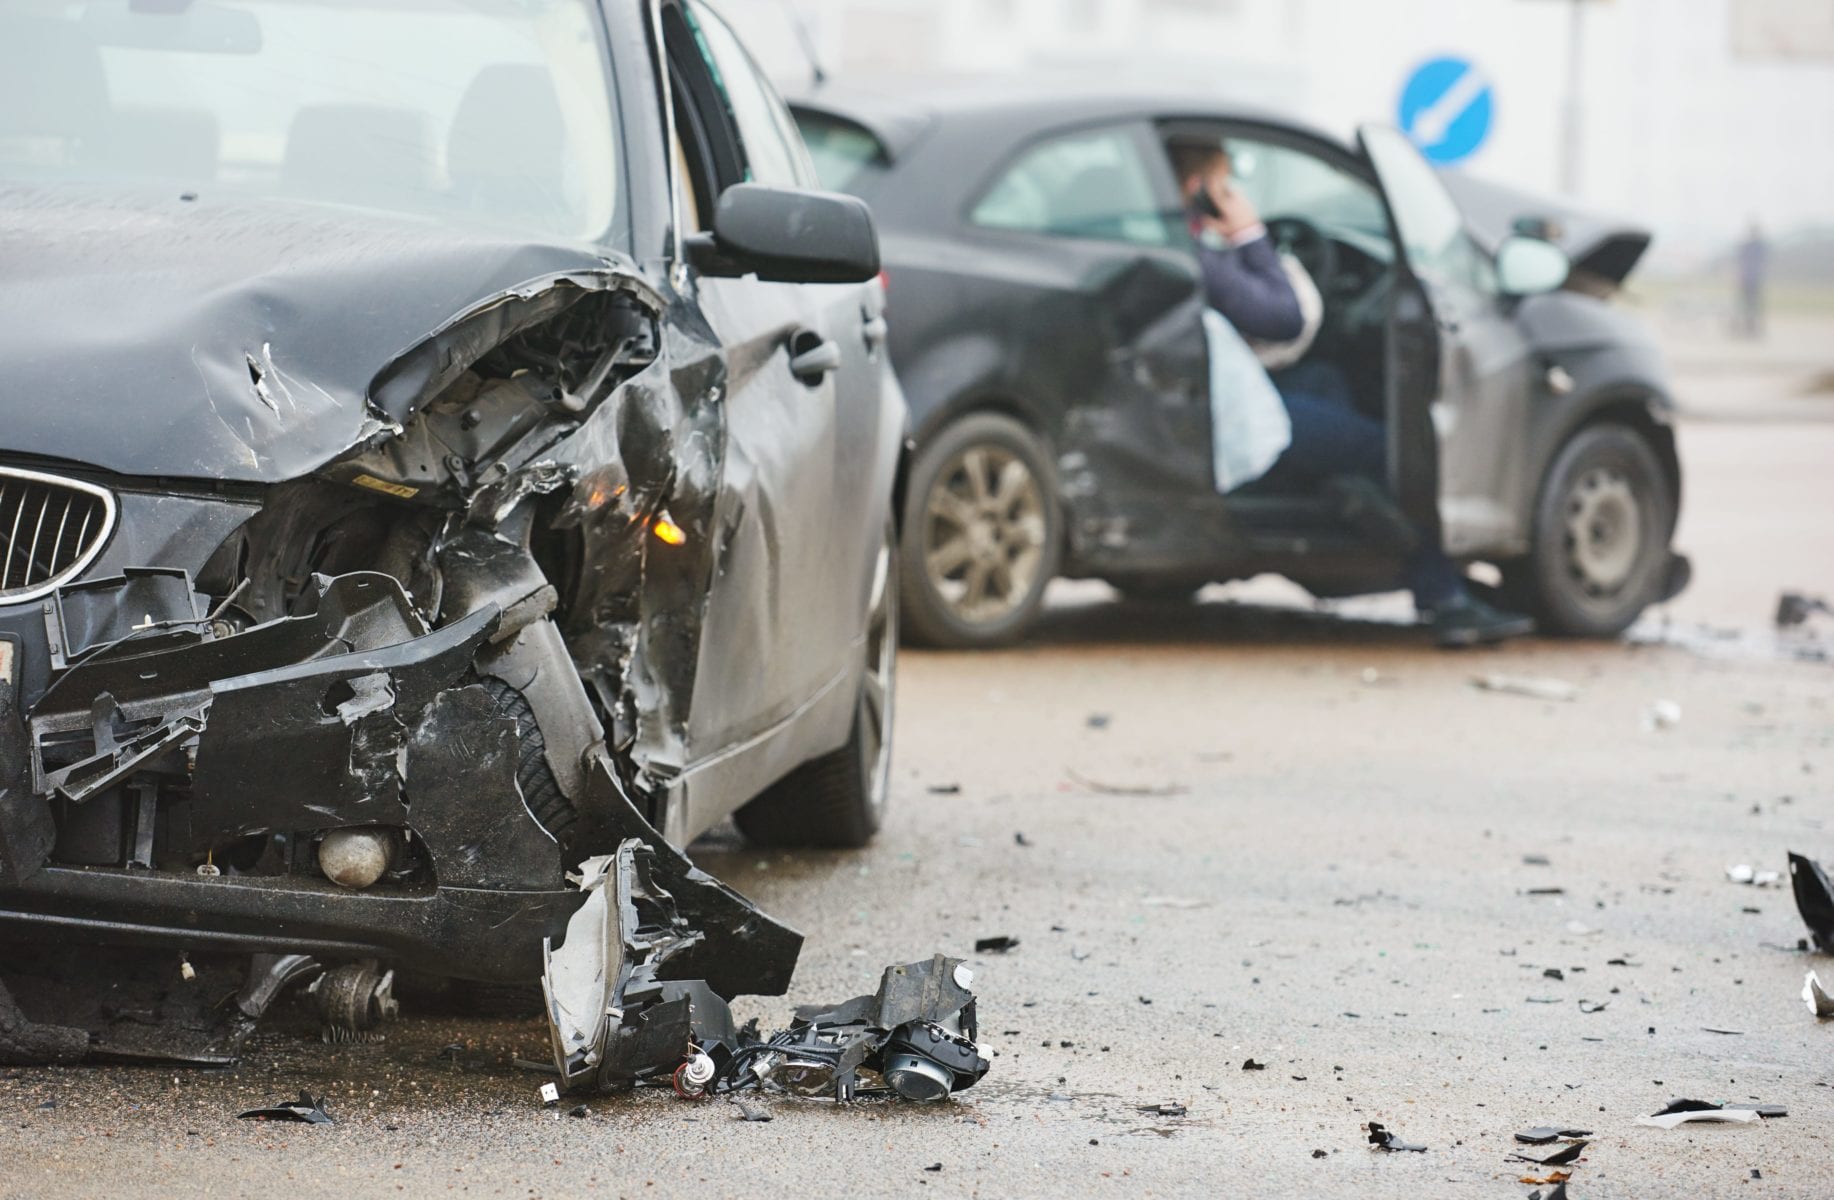 Should I Sue a Friend or Family Member for an Accident They Caused?